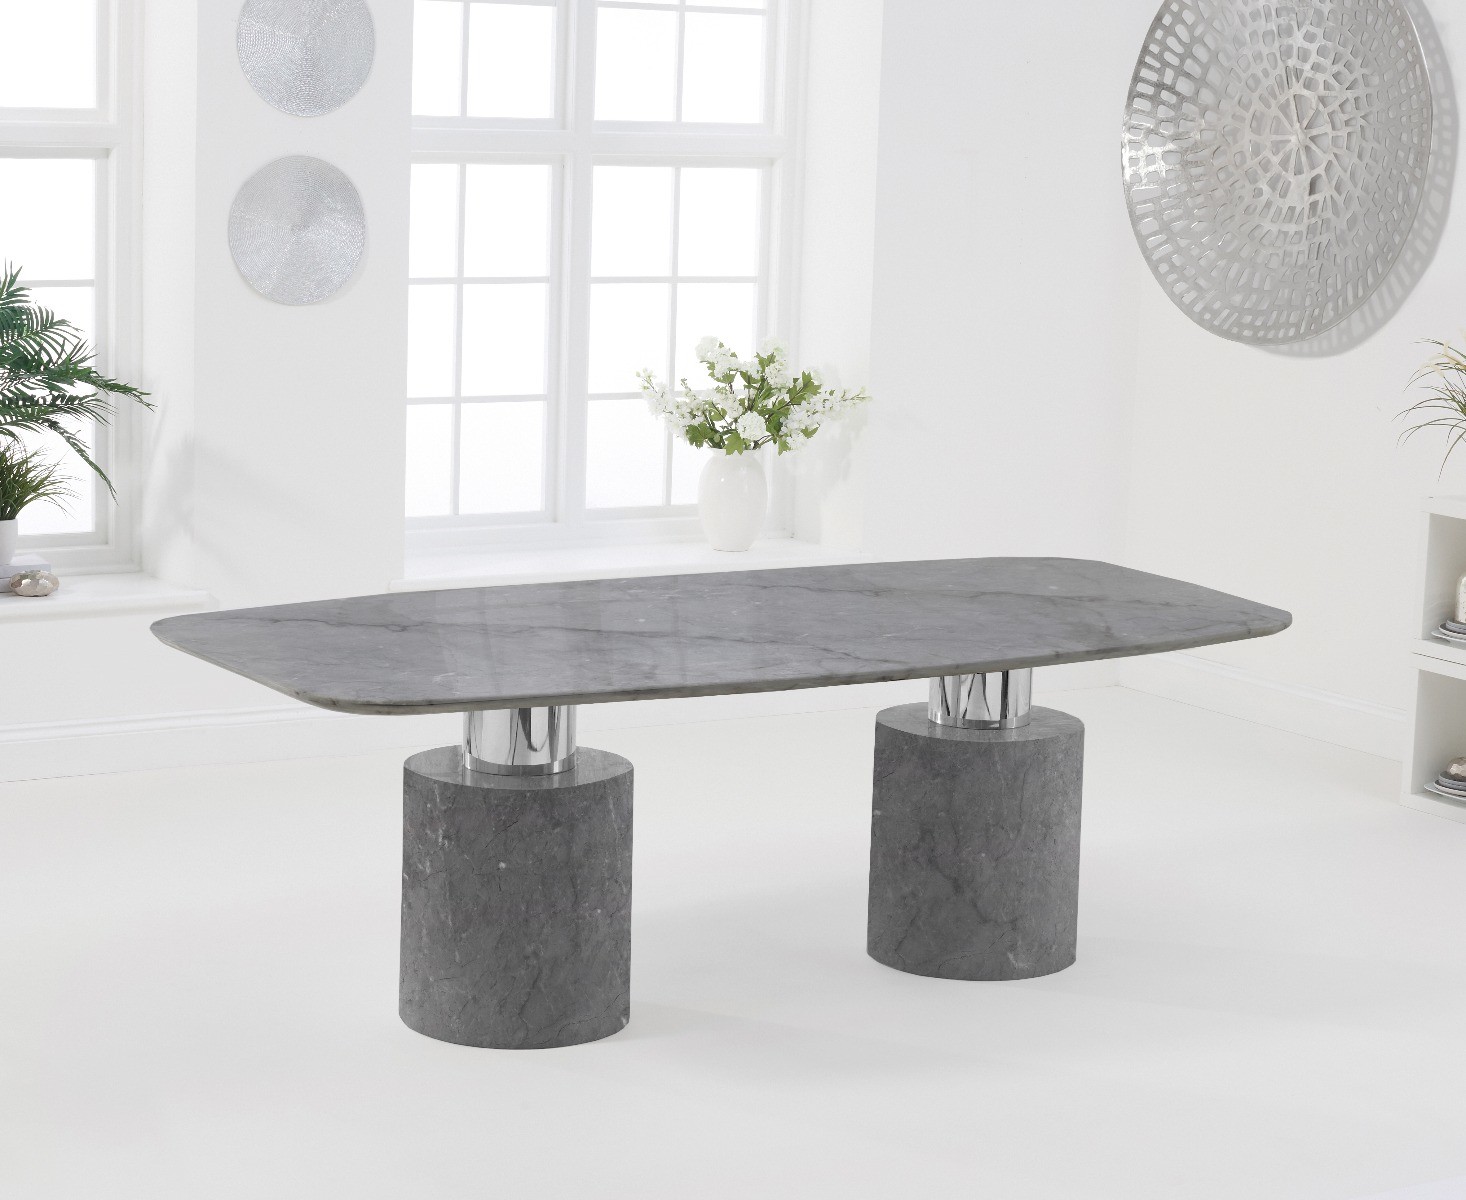 Photo 3 of Antonio 220cm grey marble dining table with 6 grey lorenzo chairs